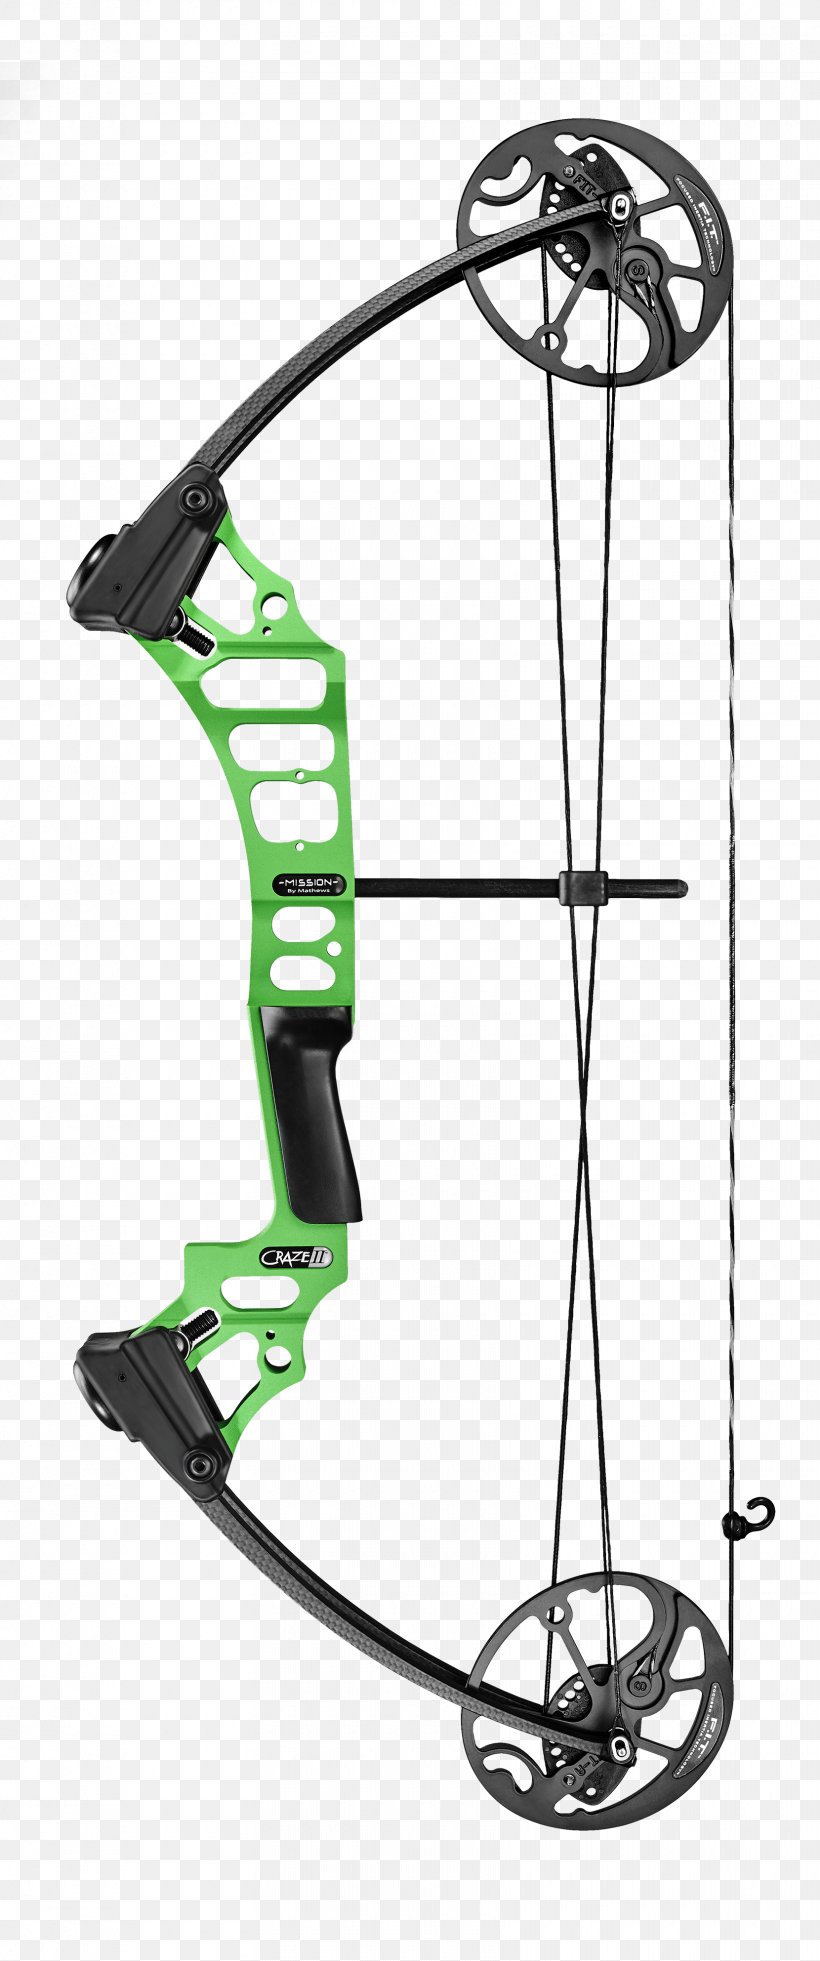 Compound Bows Bow And Arrow PSE Archery Bowhunting, PNG, 1660x3970px, Compound Bows, Archery, Bicycle Accessory, Bow And Arrow, Bowhunting Download Free